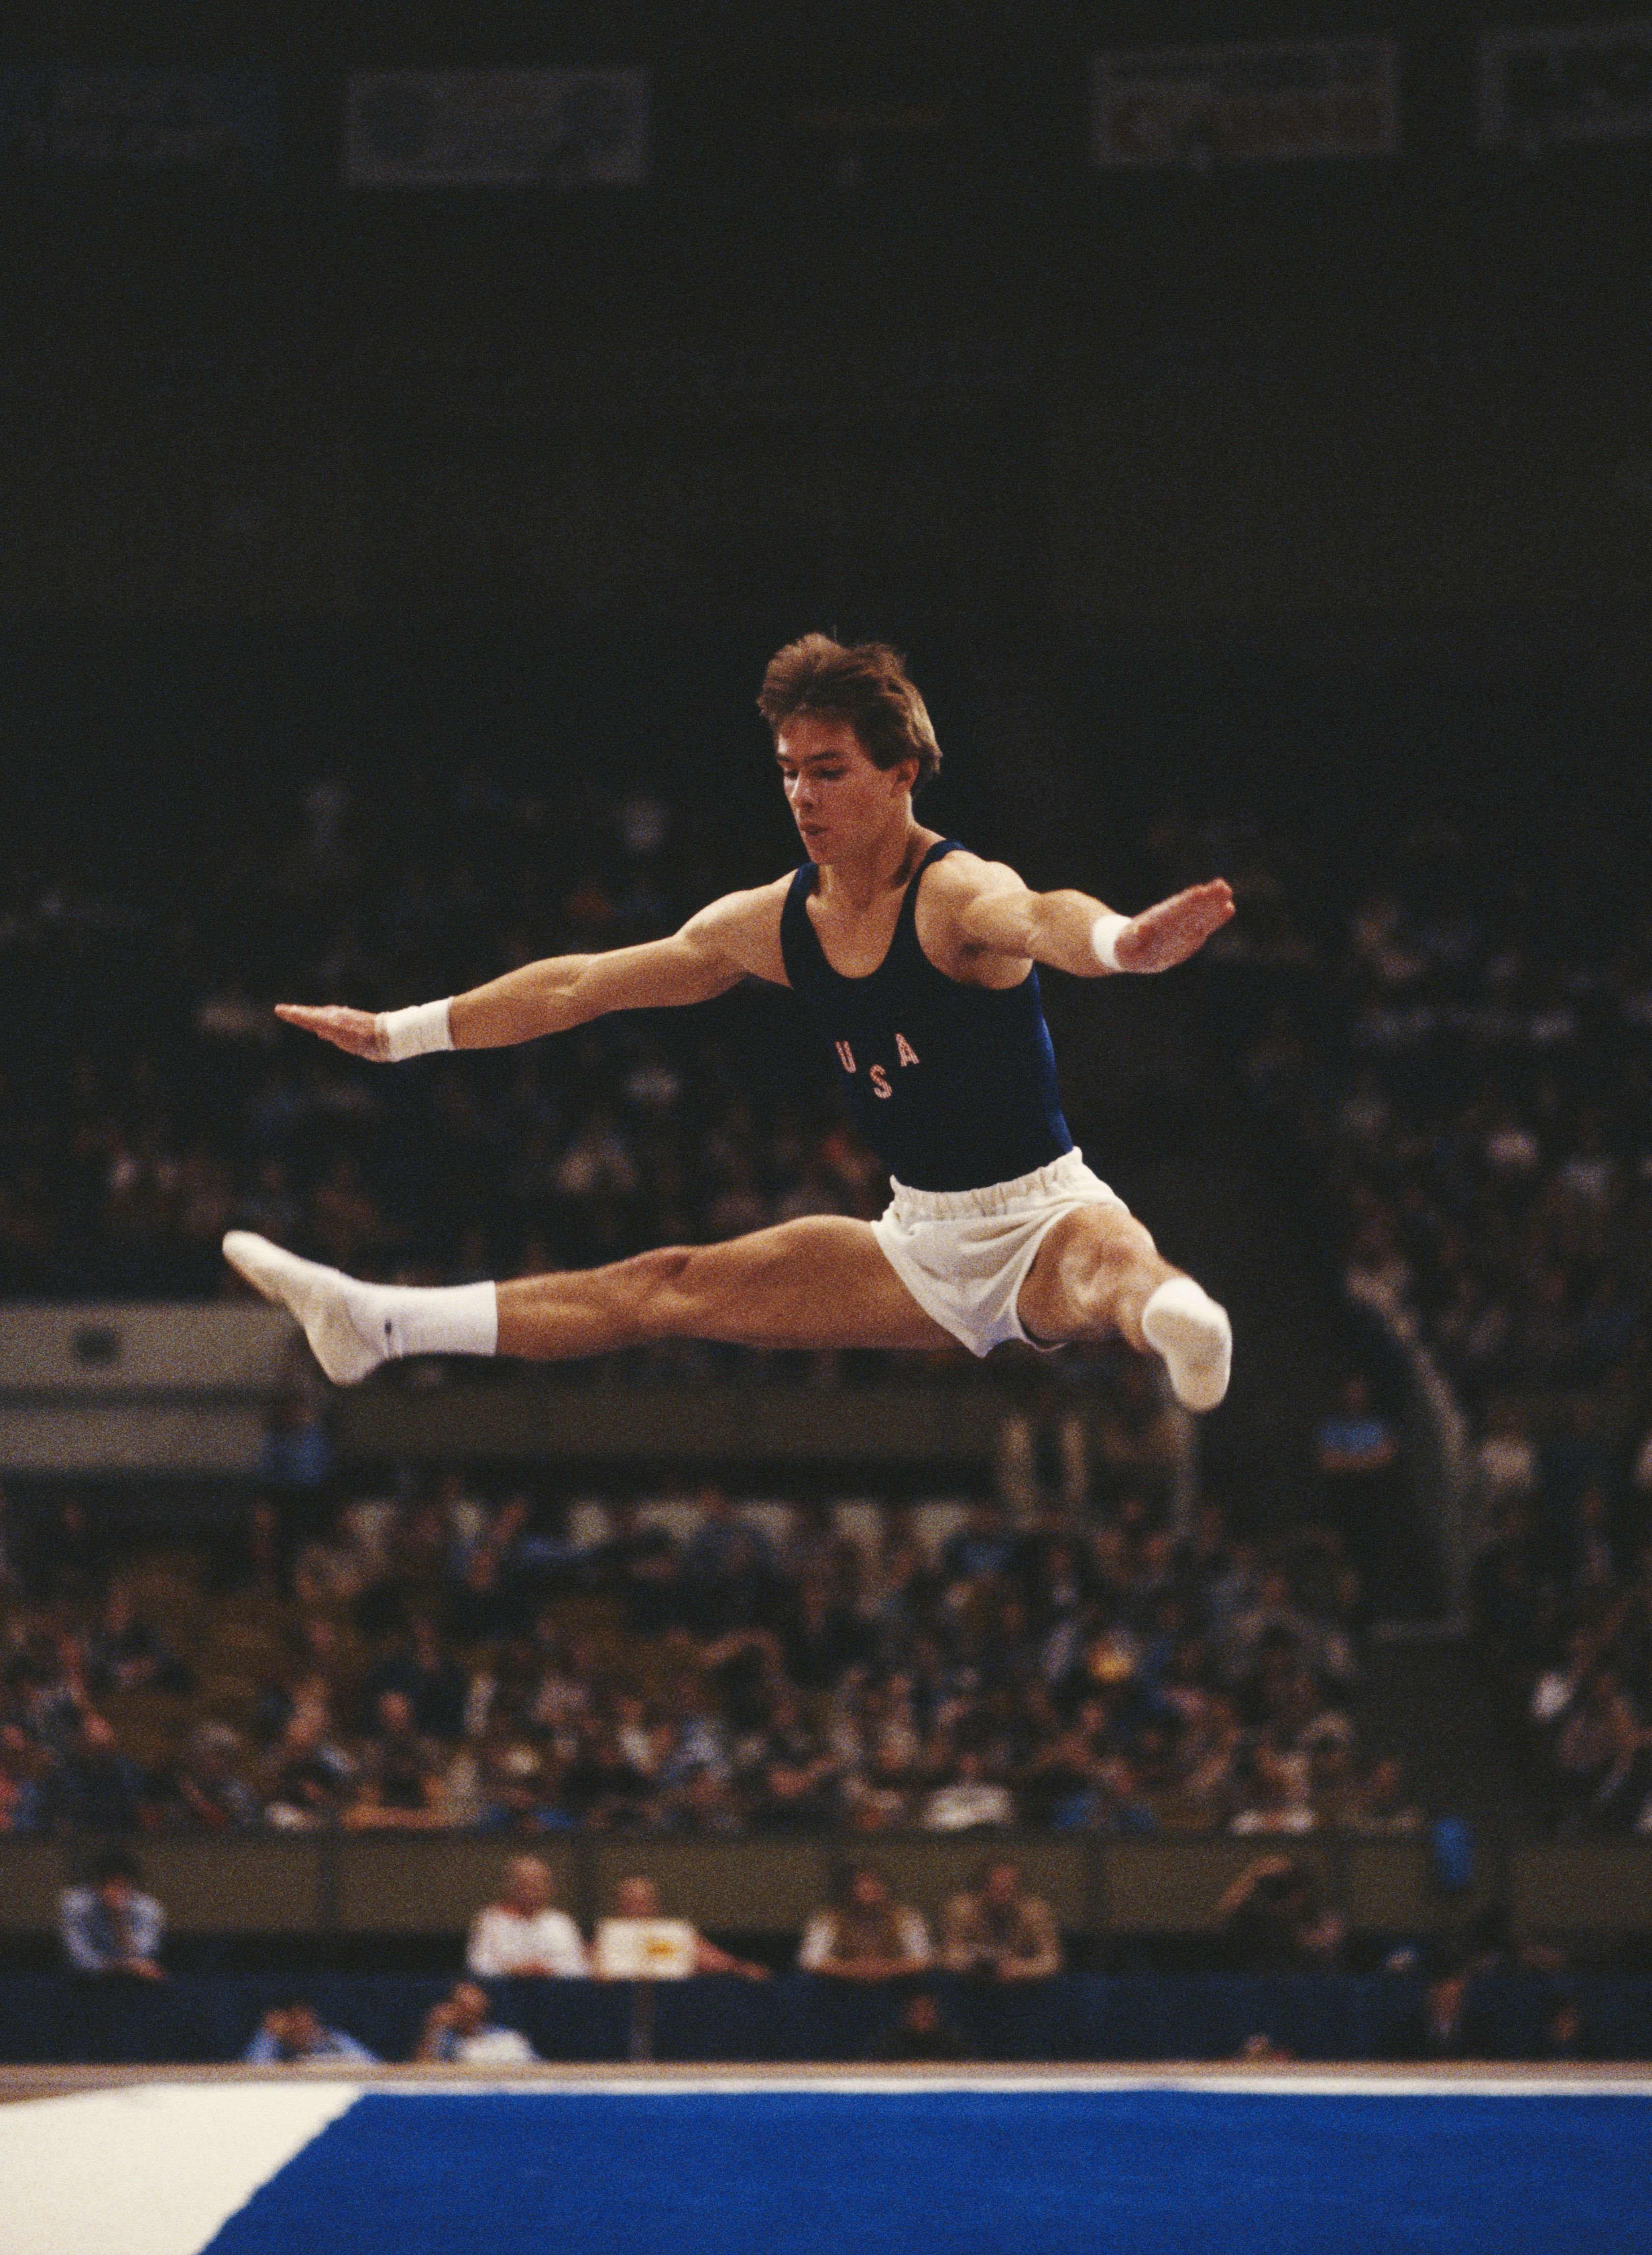 Kurt Thomas of the United States performing during the Men's All-around event during the 1979 World Artistic Gymnastics Championships in Fort Worth, Texas, United States | Photo: Tony Duffy/Getty Images